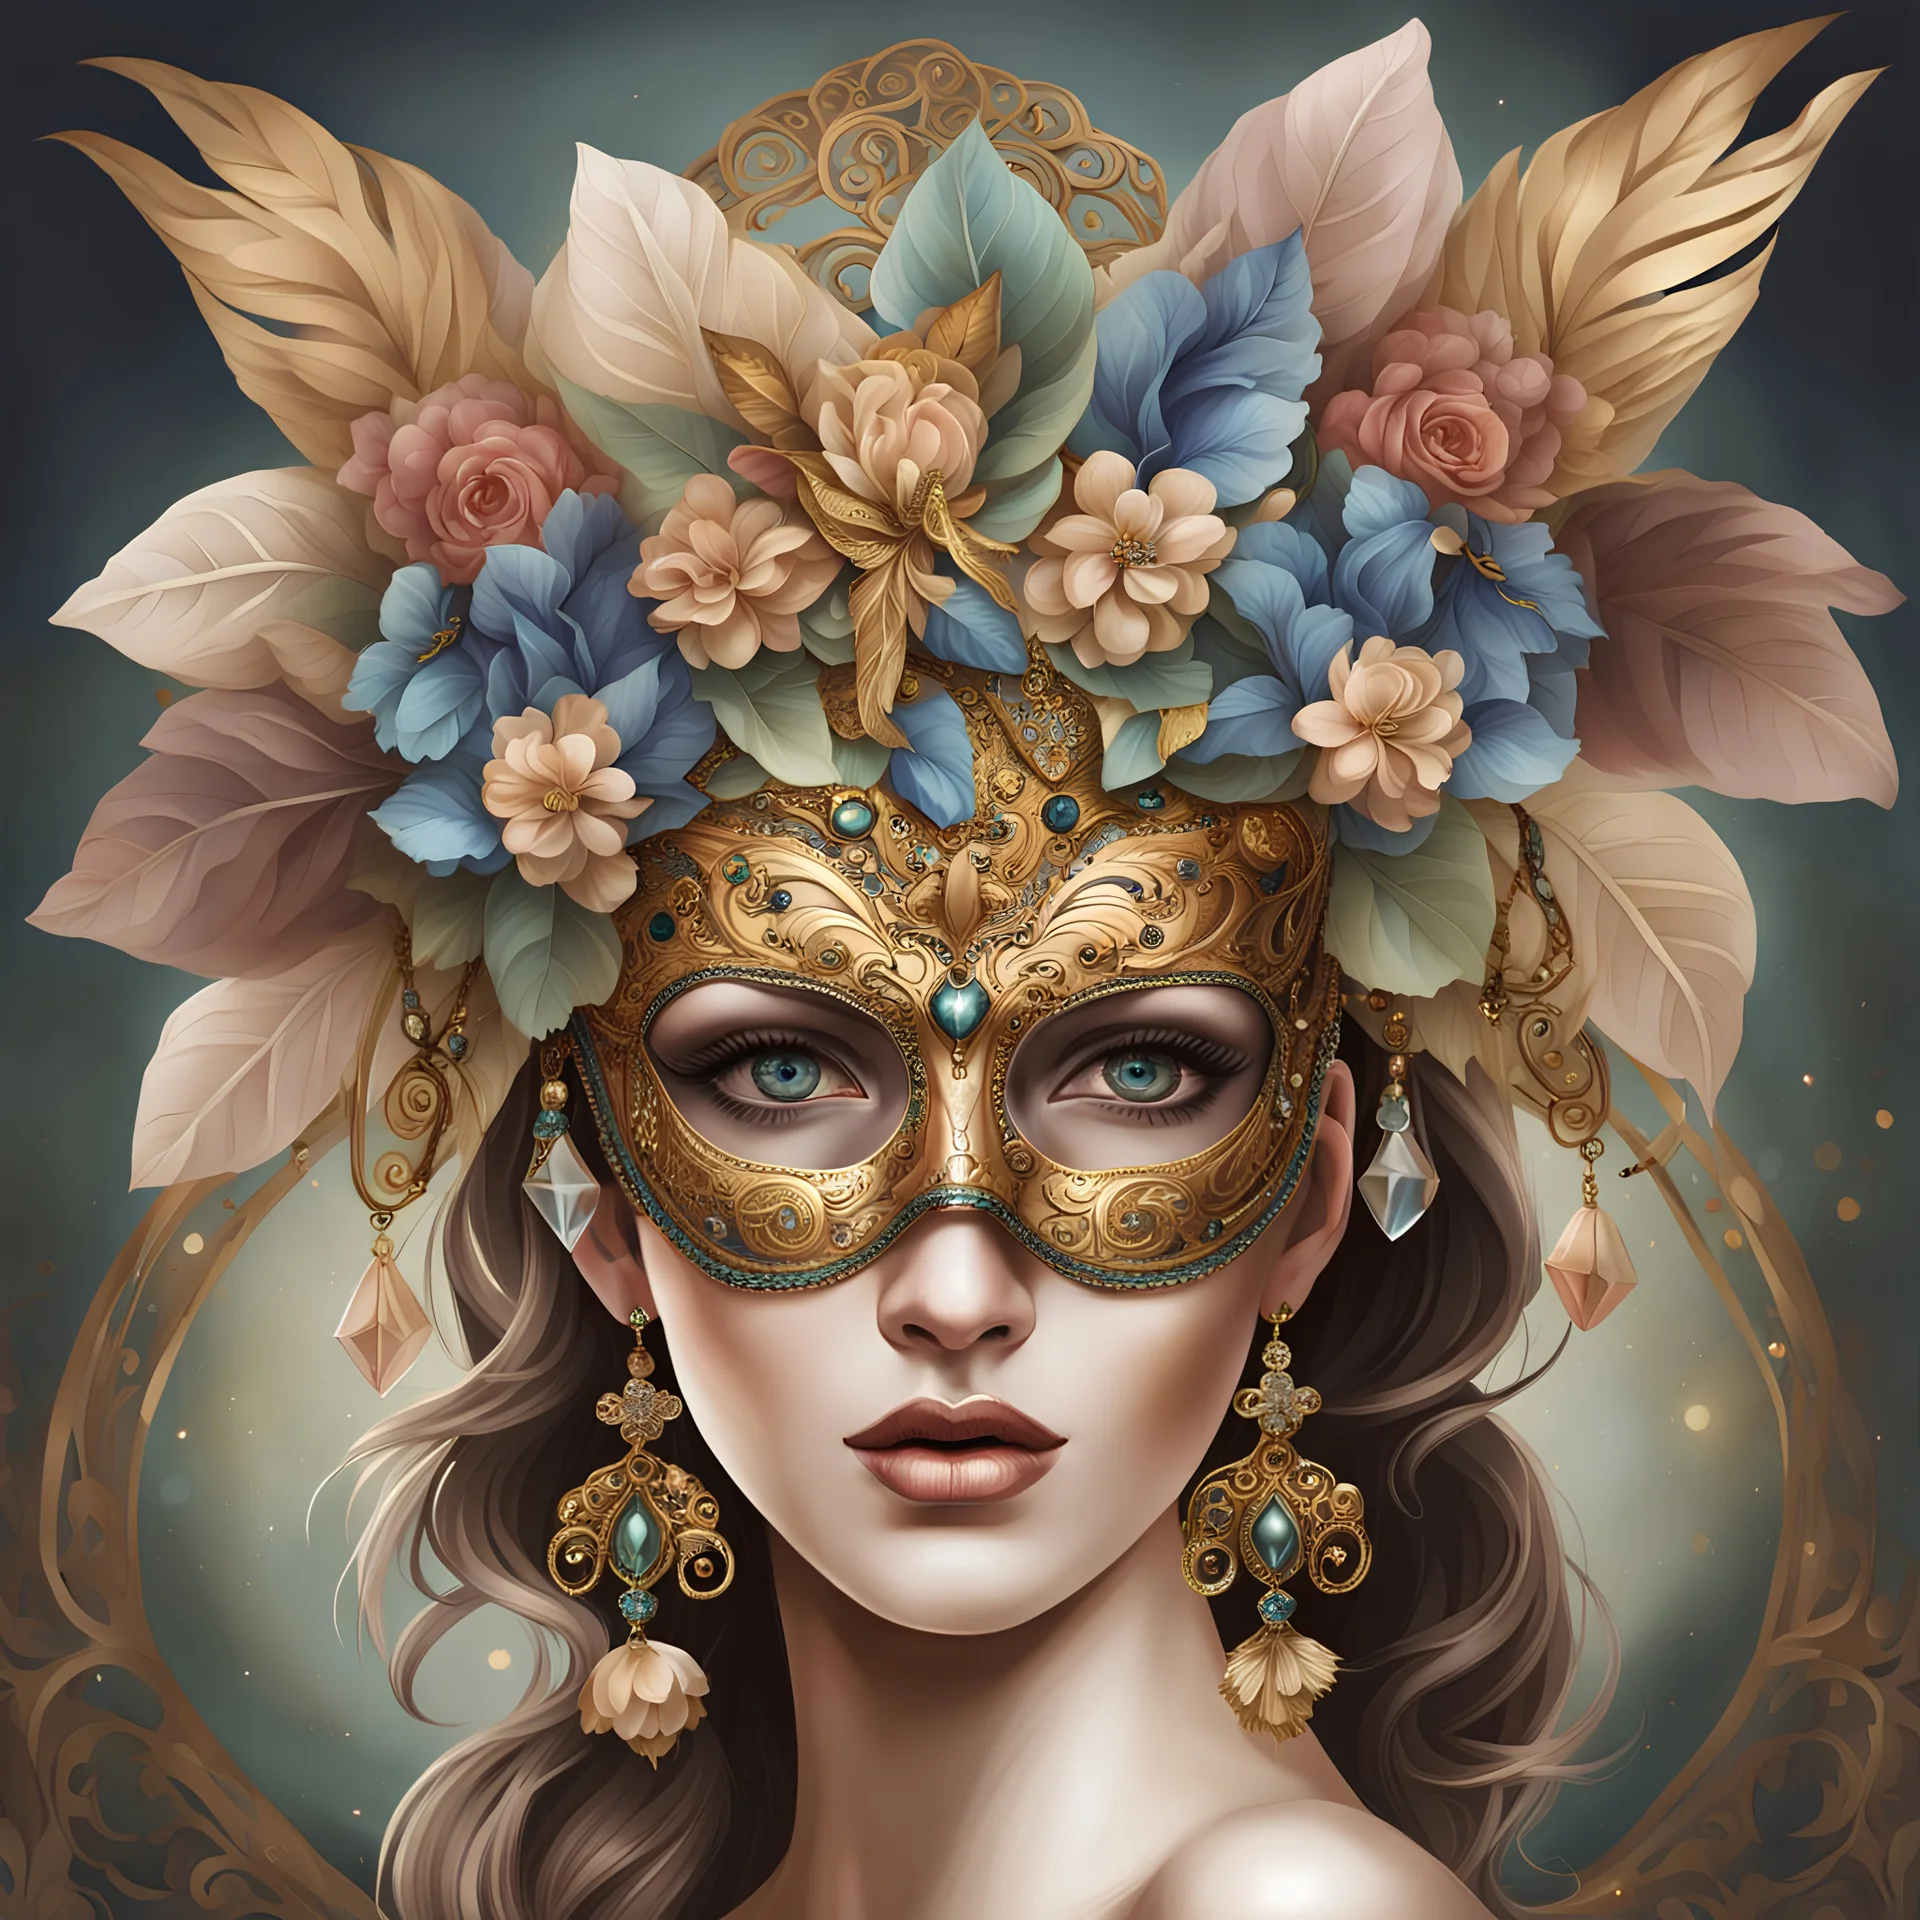 Realism image of goddess women adorned with an elaborate and ornate masquerade mask. The mask is embellished with jewels and glass floral decorations. Accompanying the mask are luxurious accessories, such as a necklace and earrings, that appear to be crafted from precious stones and metals.